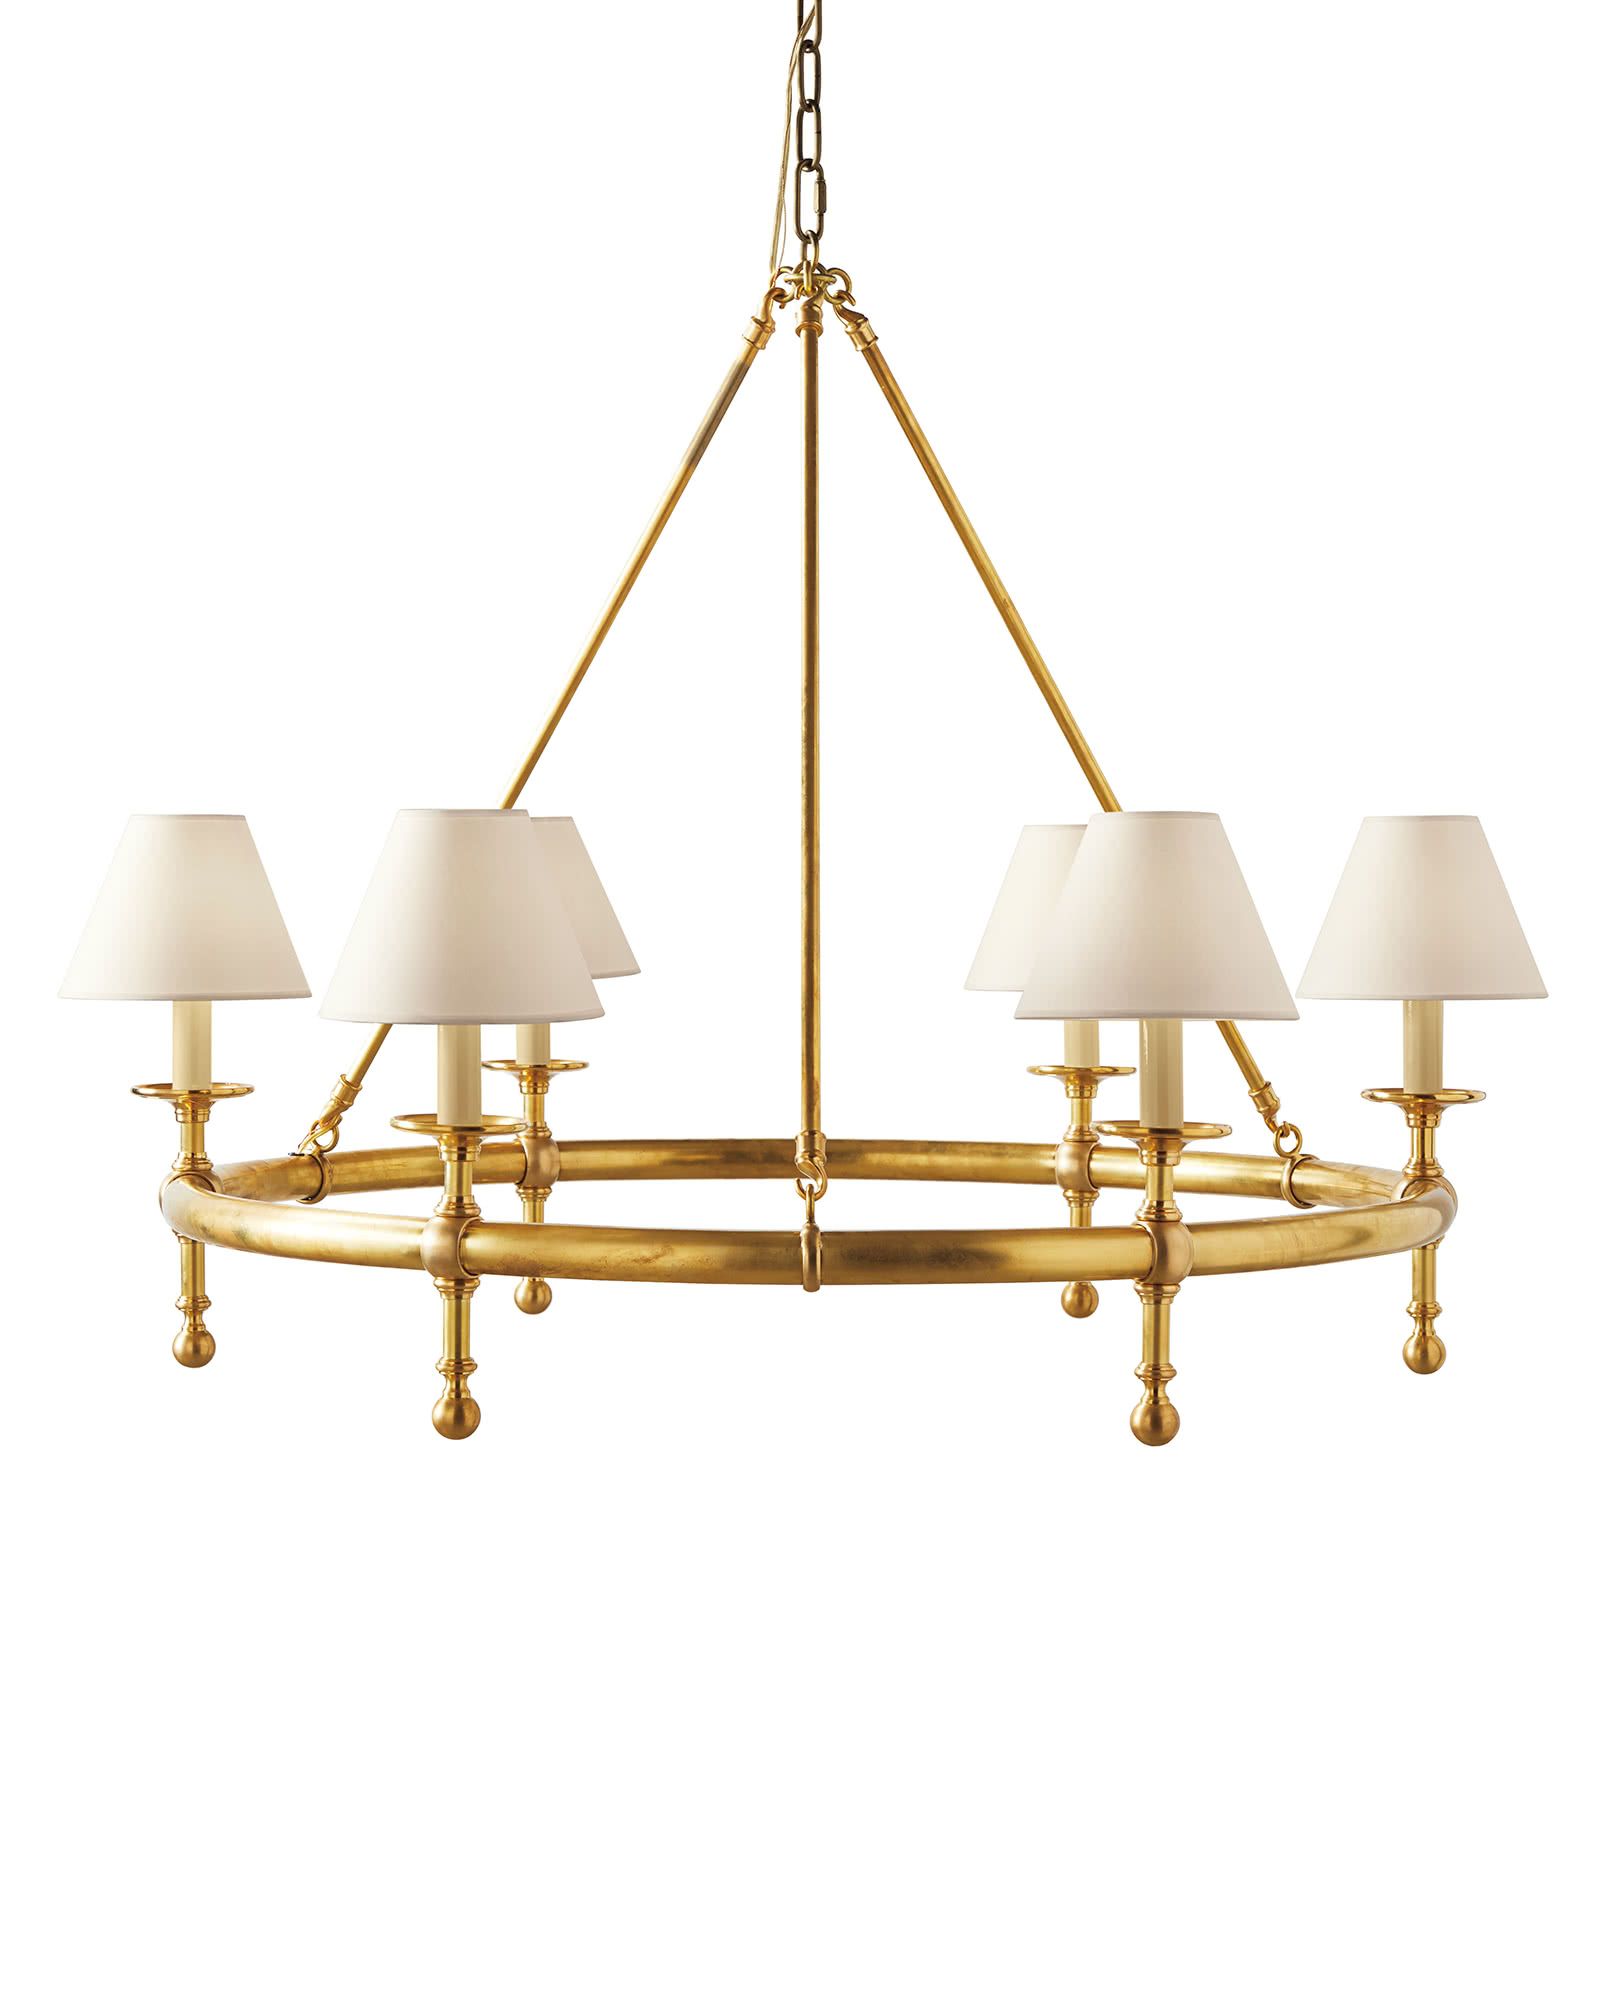 Rosecliff Chandelier
        LA-H156-01 | Serena and Lily